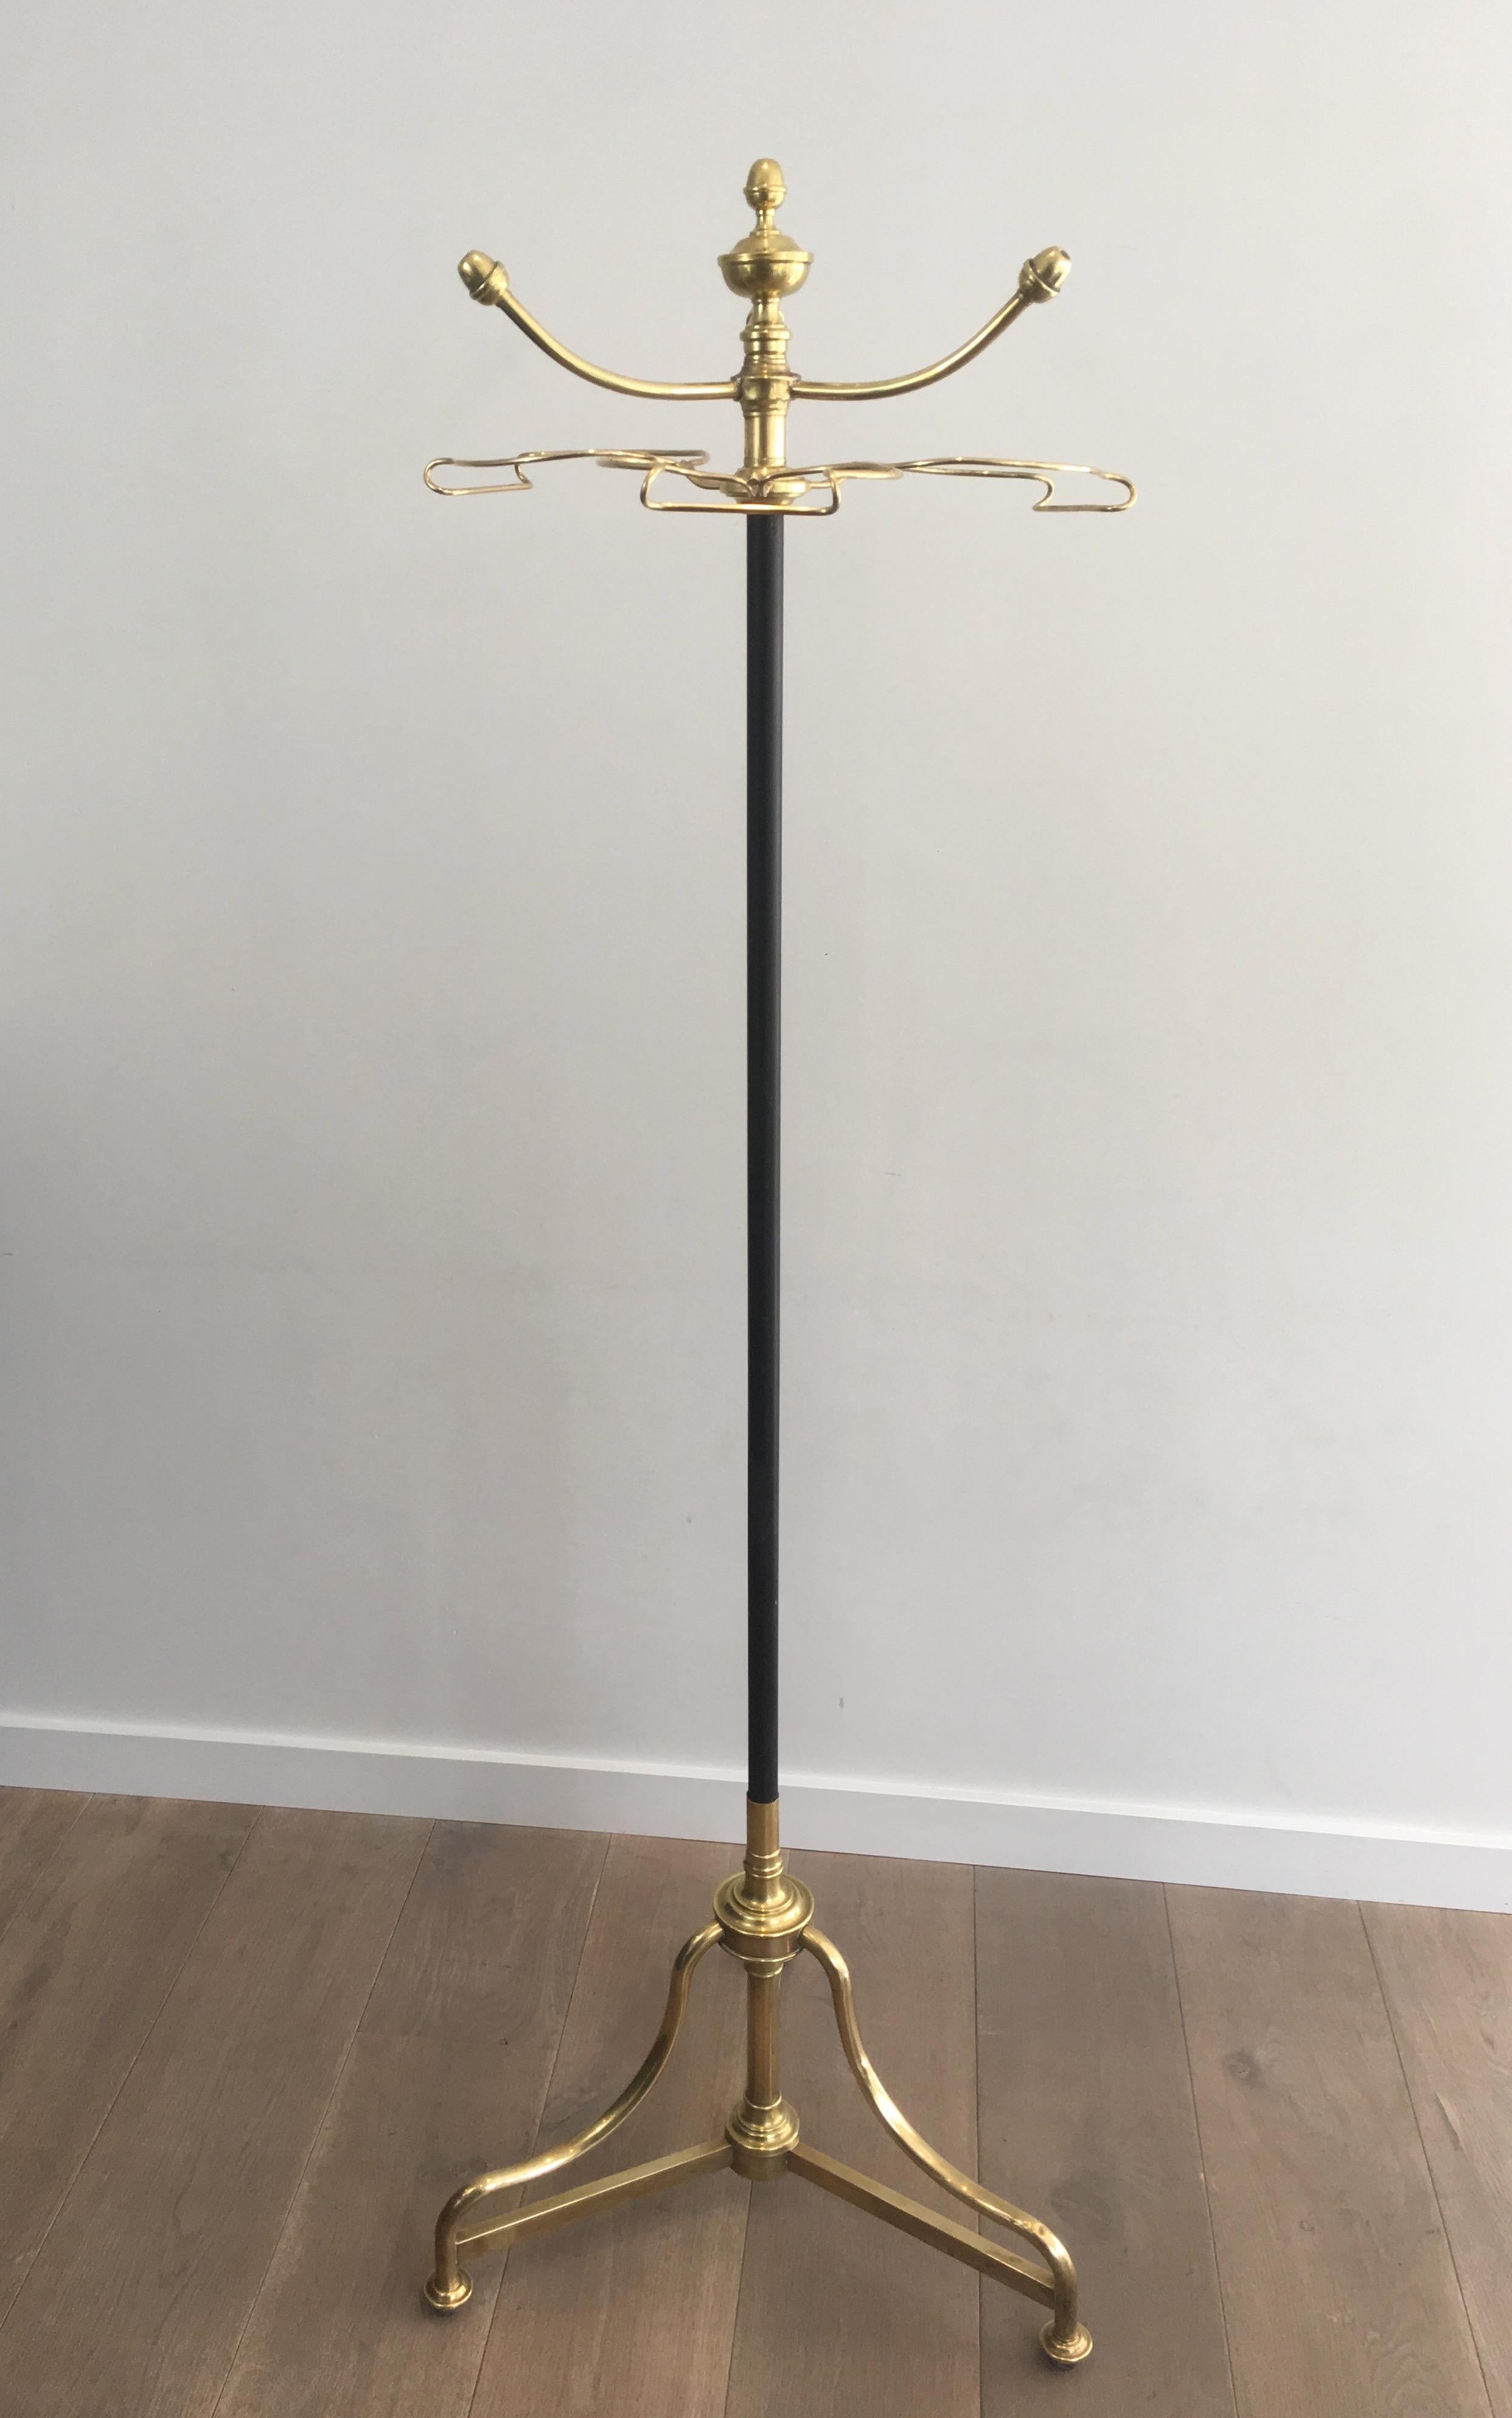 This very nice and decorative coat and hat rack on stand is made of brass with a black lacquered central part. This is a French work, circa 1900.